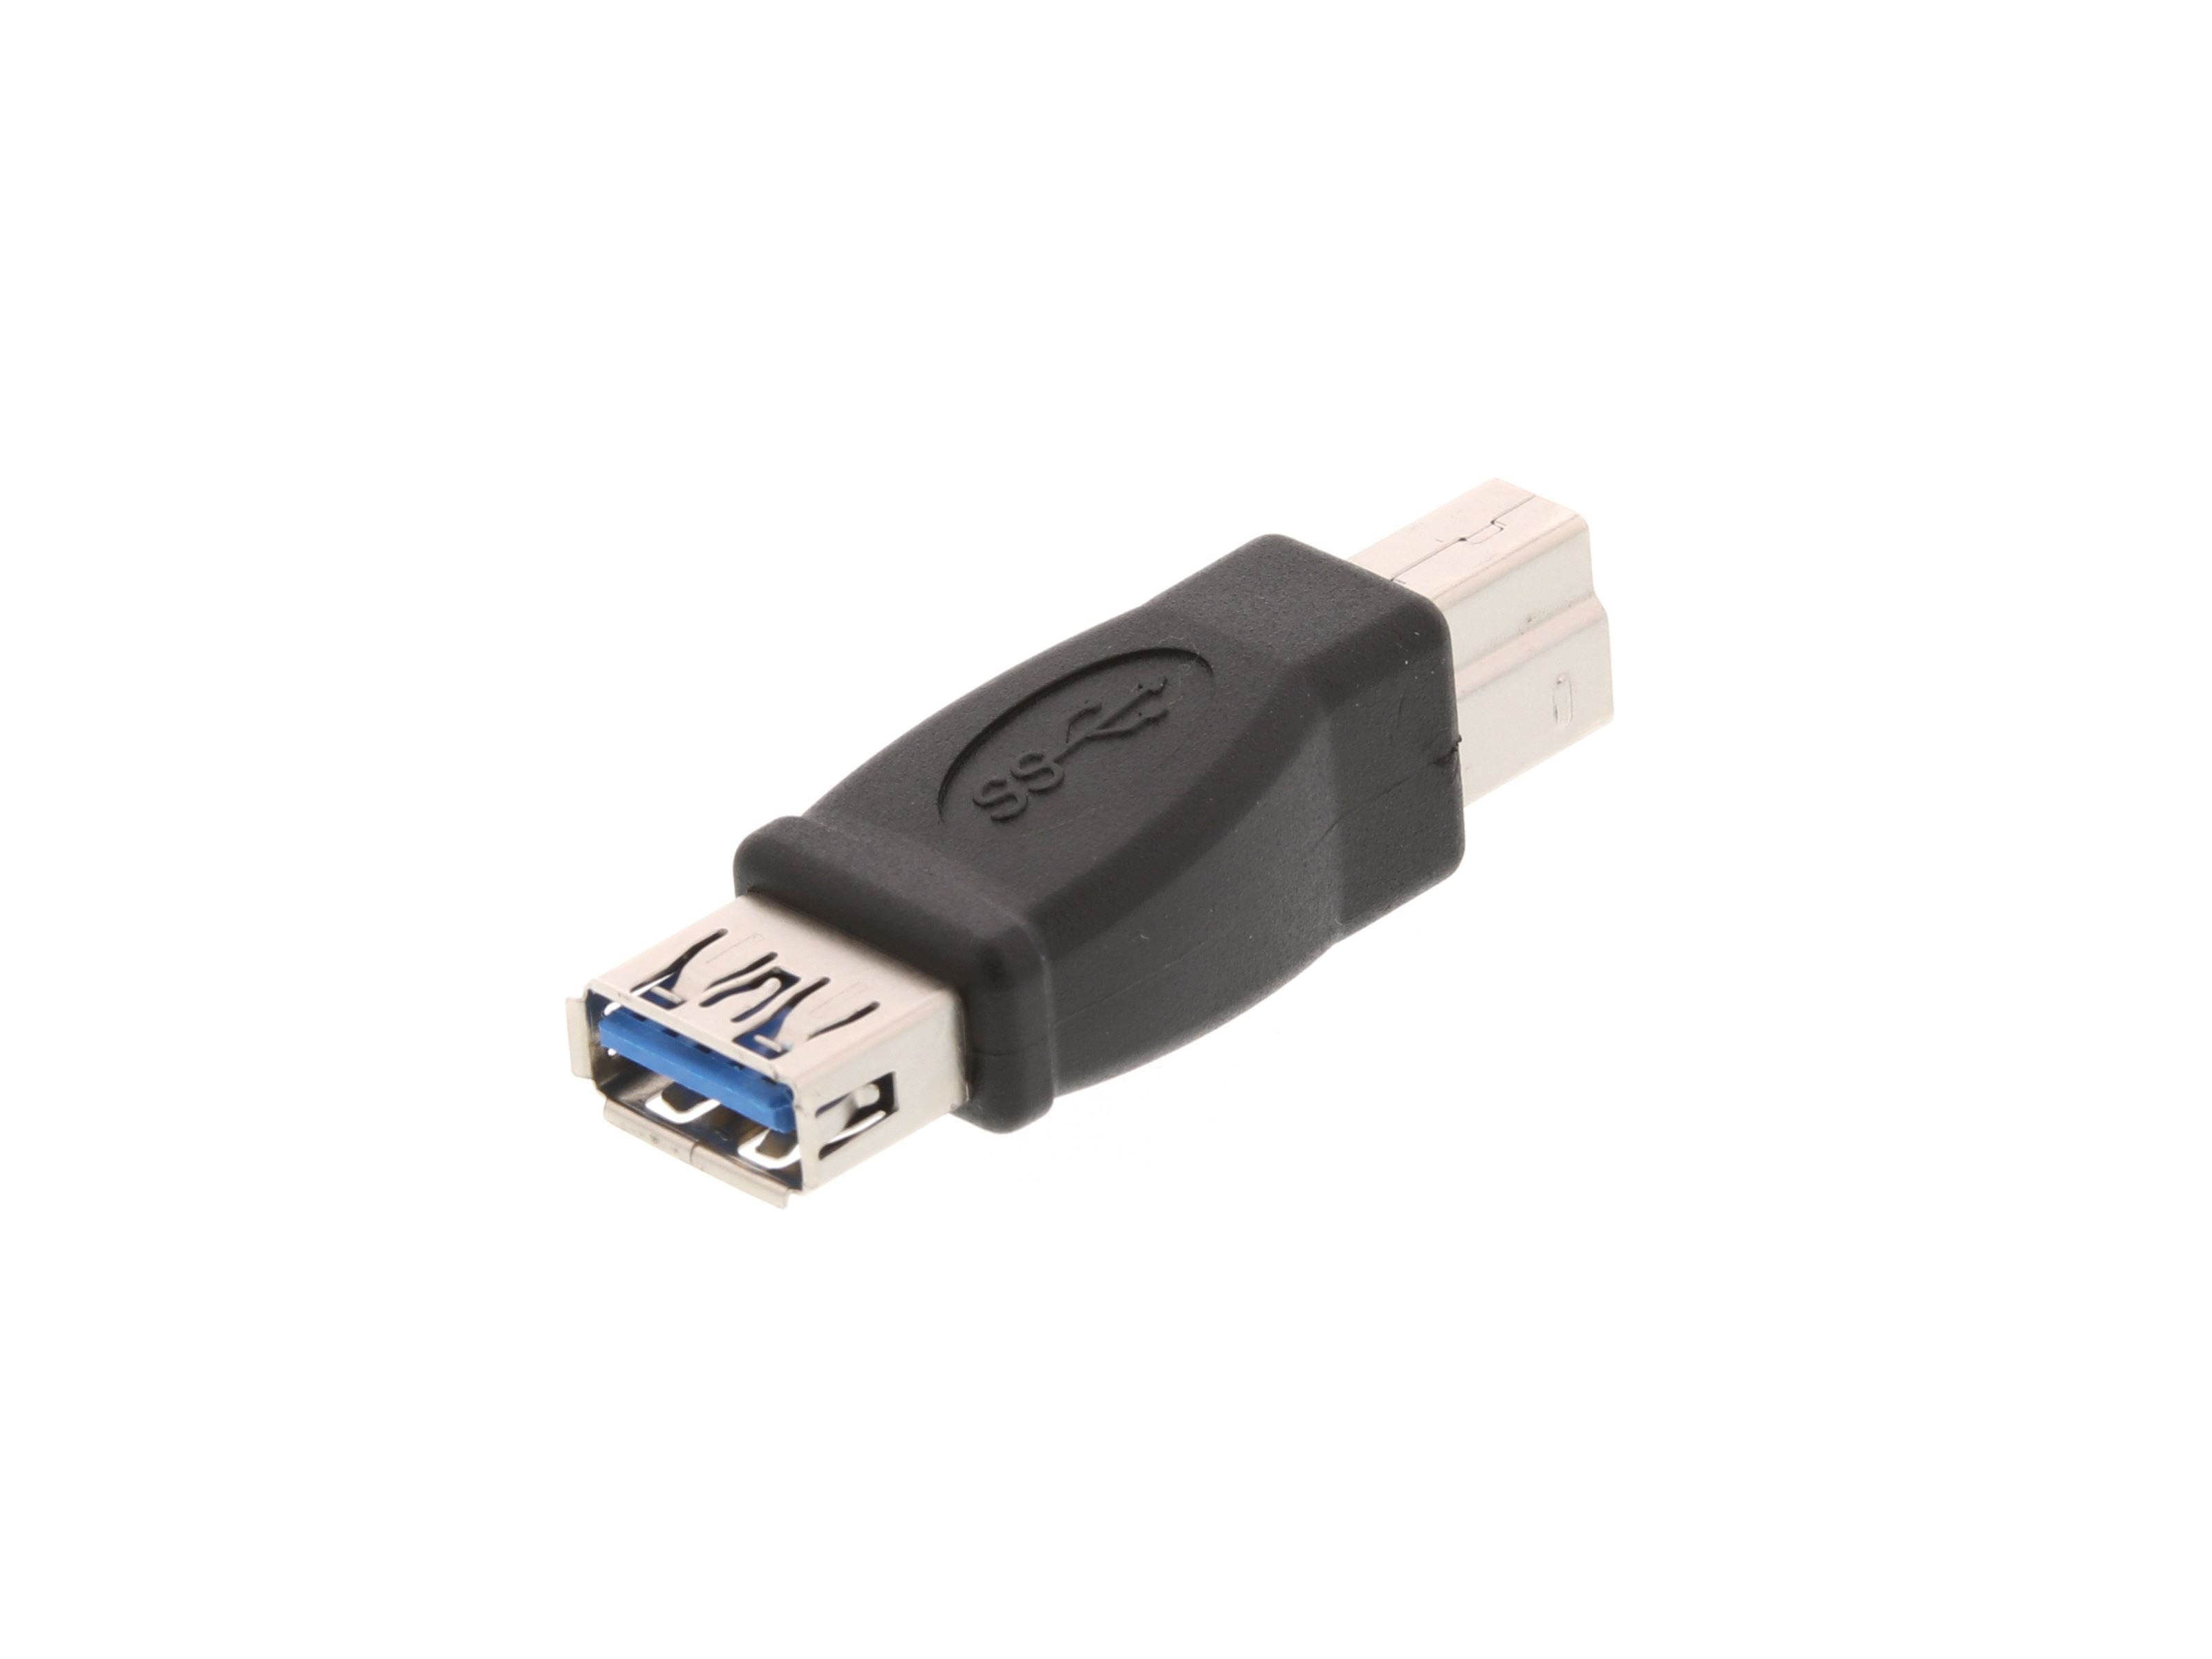 Næsten håndflade hundrede USB 3.0 Adapter - USB A Female to USB B Male - 5 Pack at Cables N More